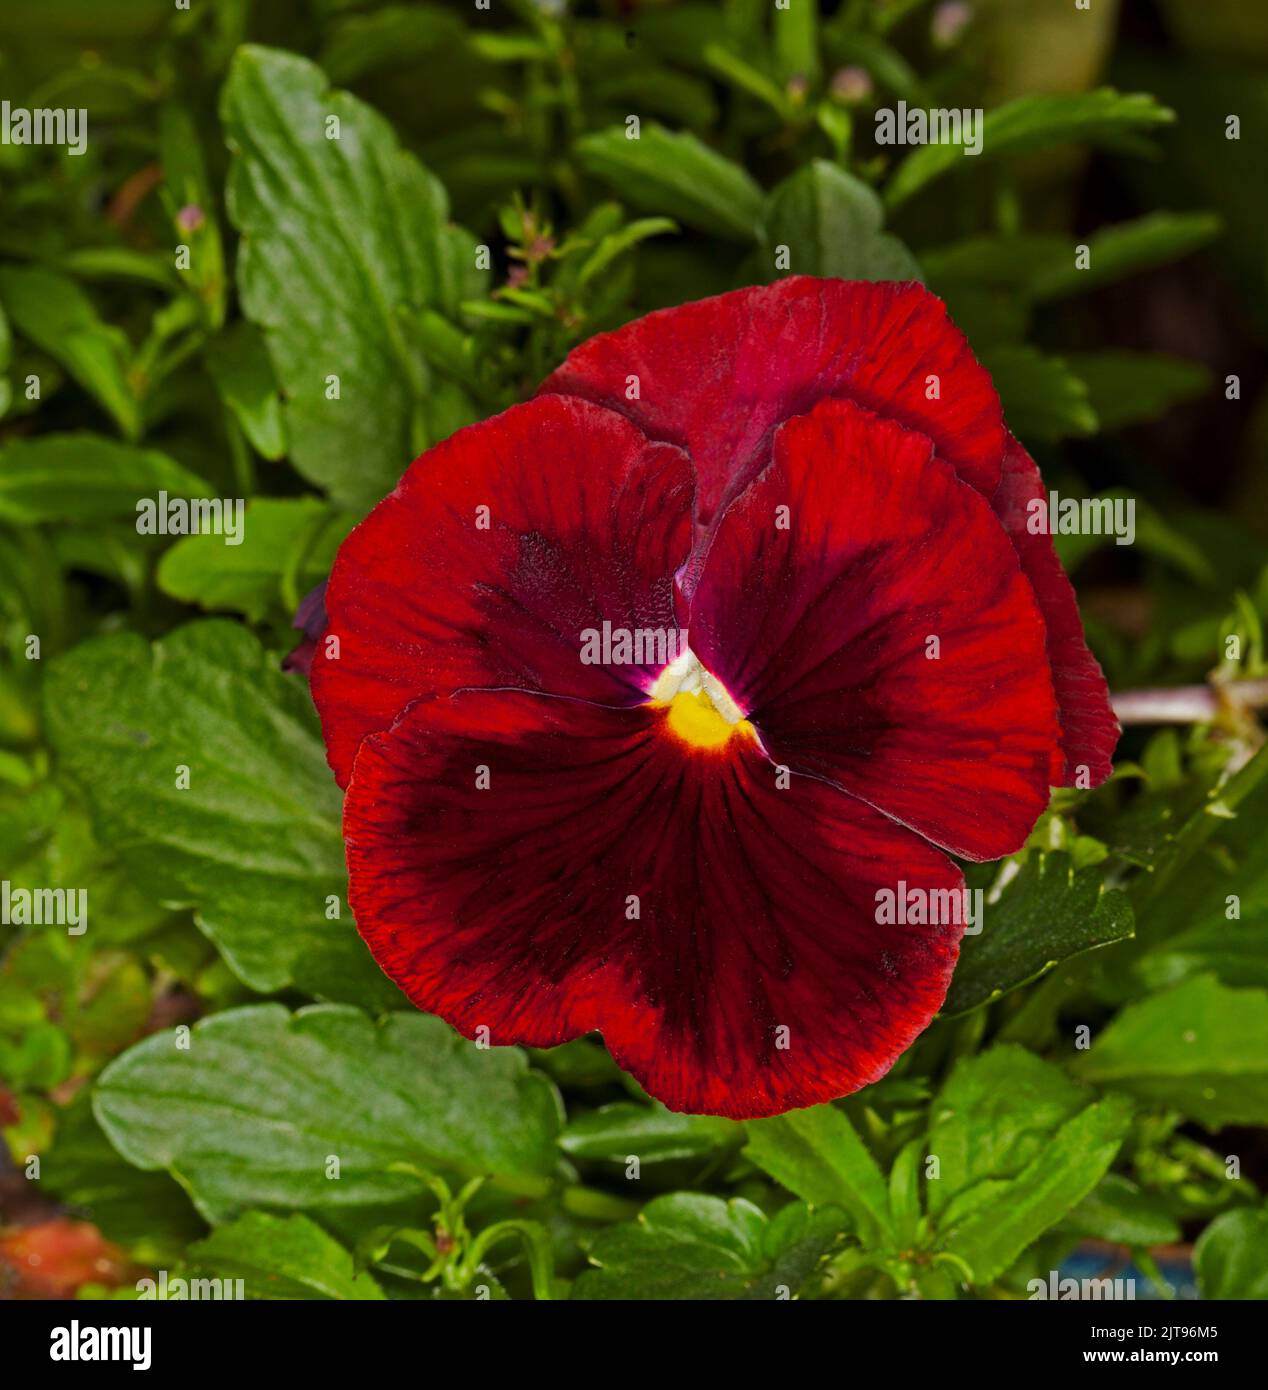 Stunning large dark red flower of Pansy, a flowering annual, on background of emerald green leaves Stock Photo